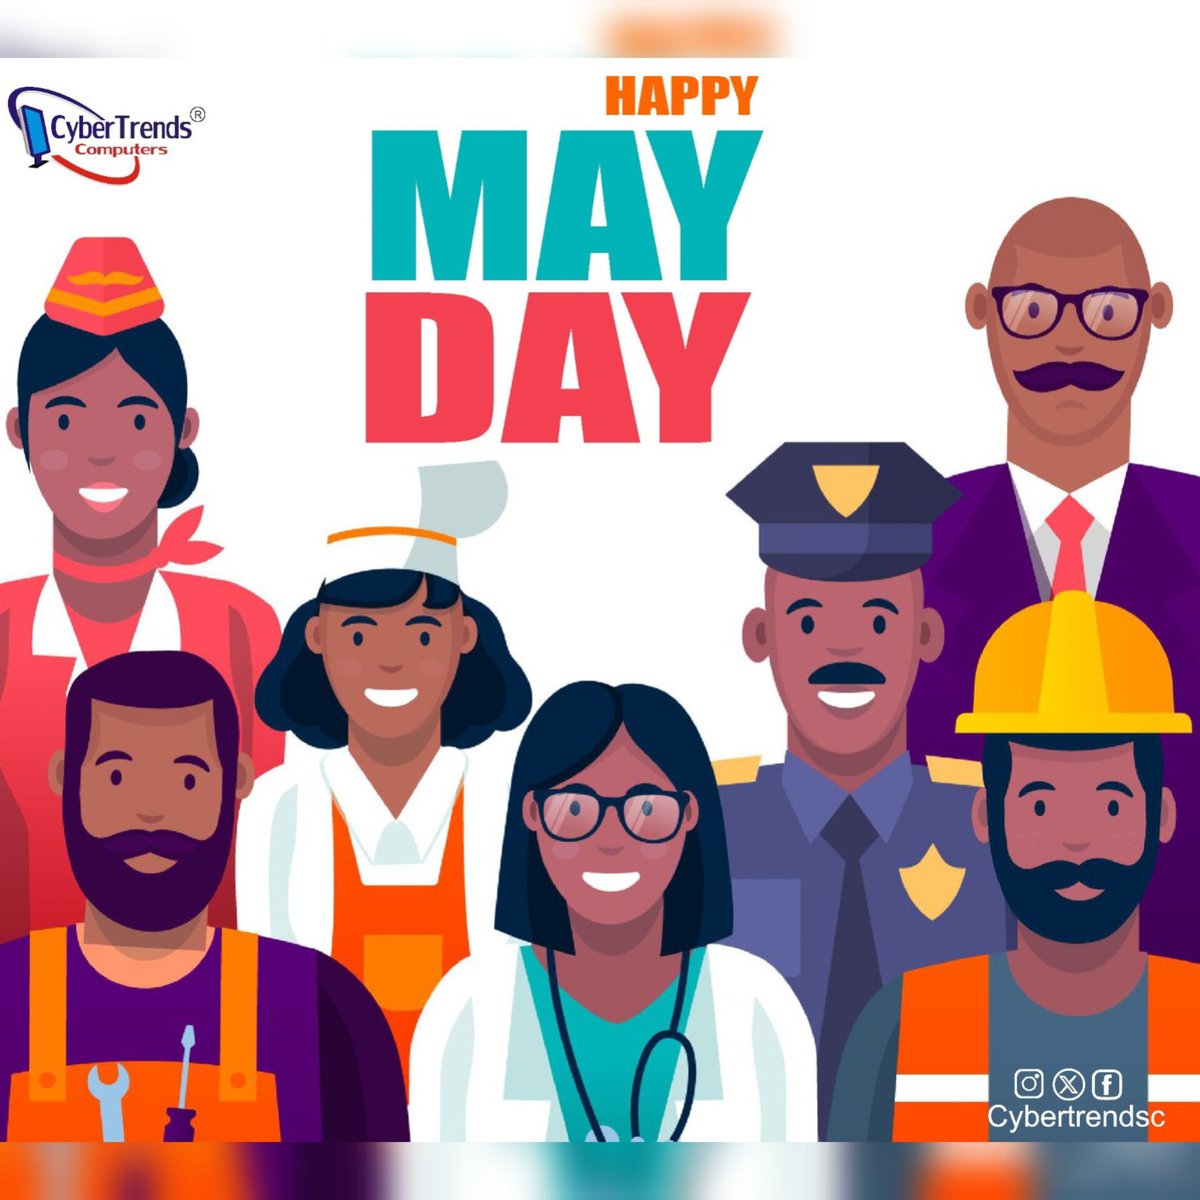 It's May Day. A remembrance of hard work and resilience. To our countrymen, Una well done o!